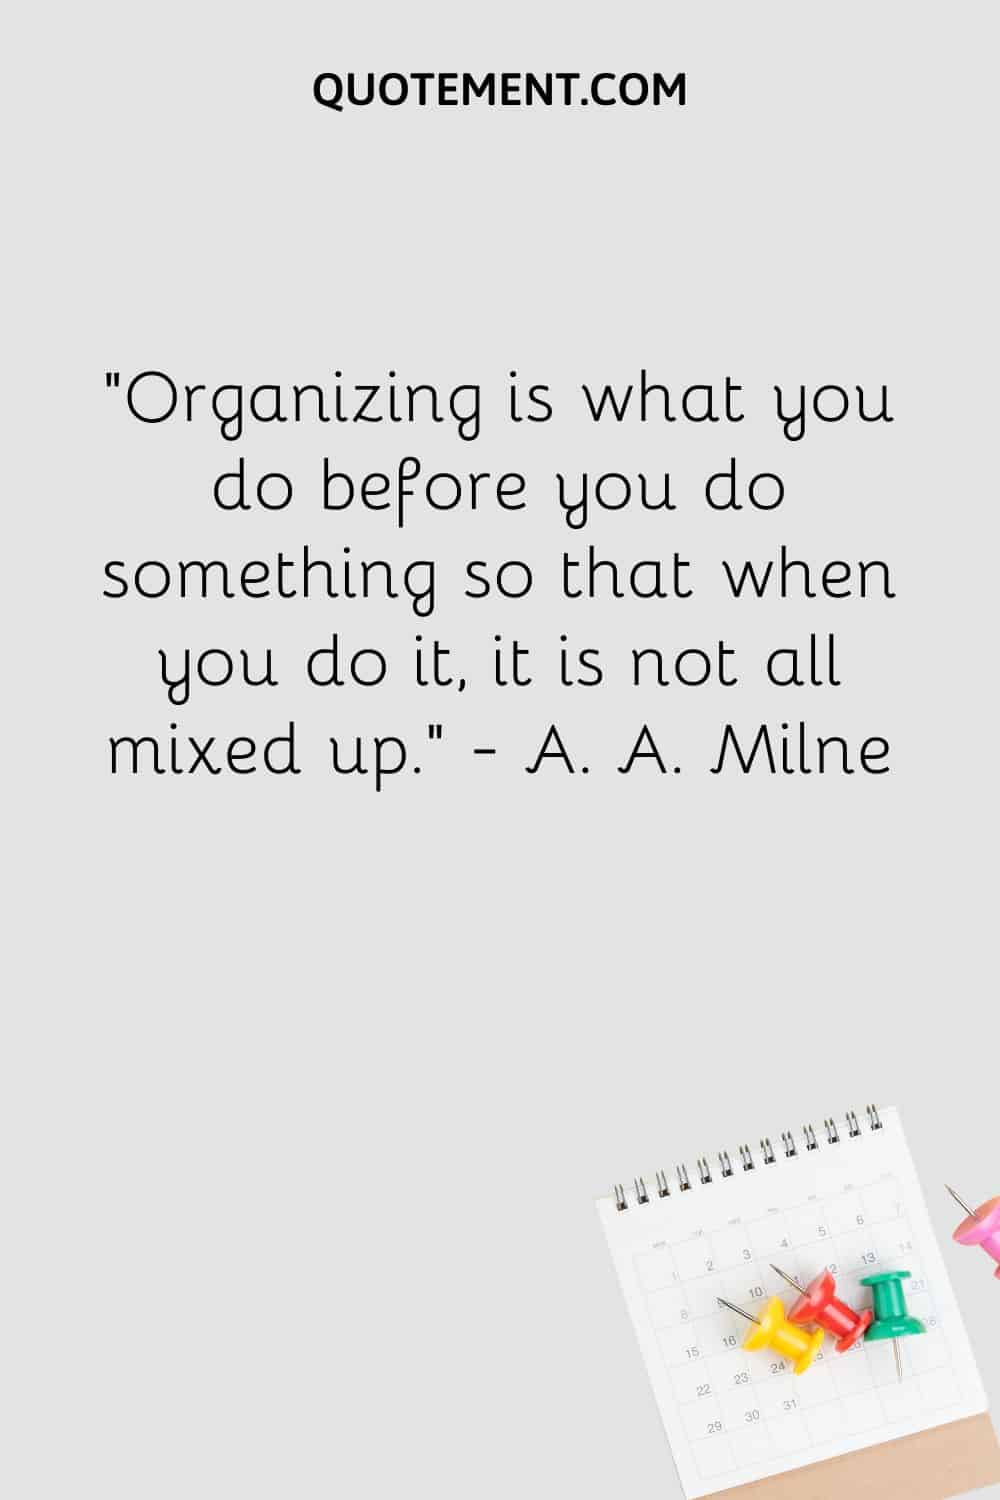 Organizing is what you do before you do something so that when you do it, it is not all mixed up